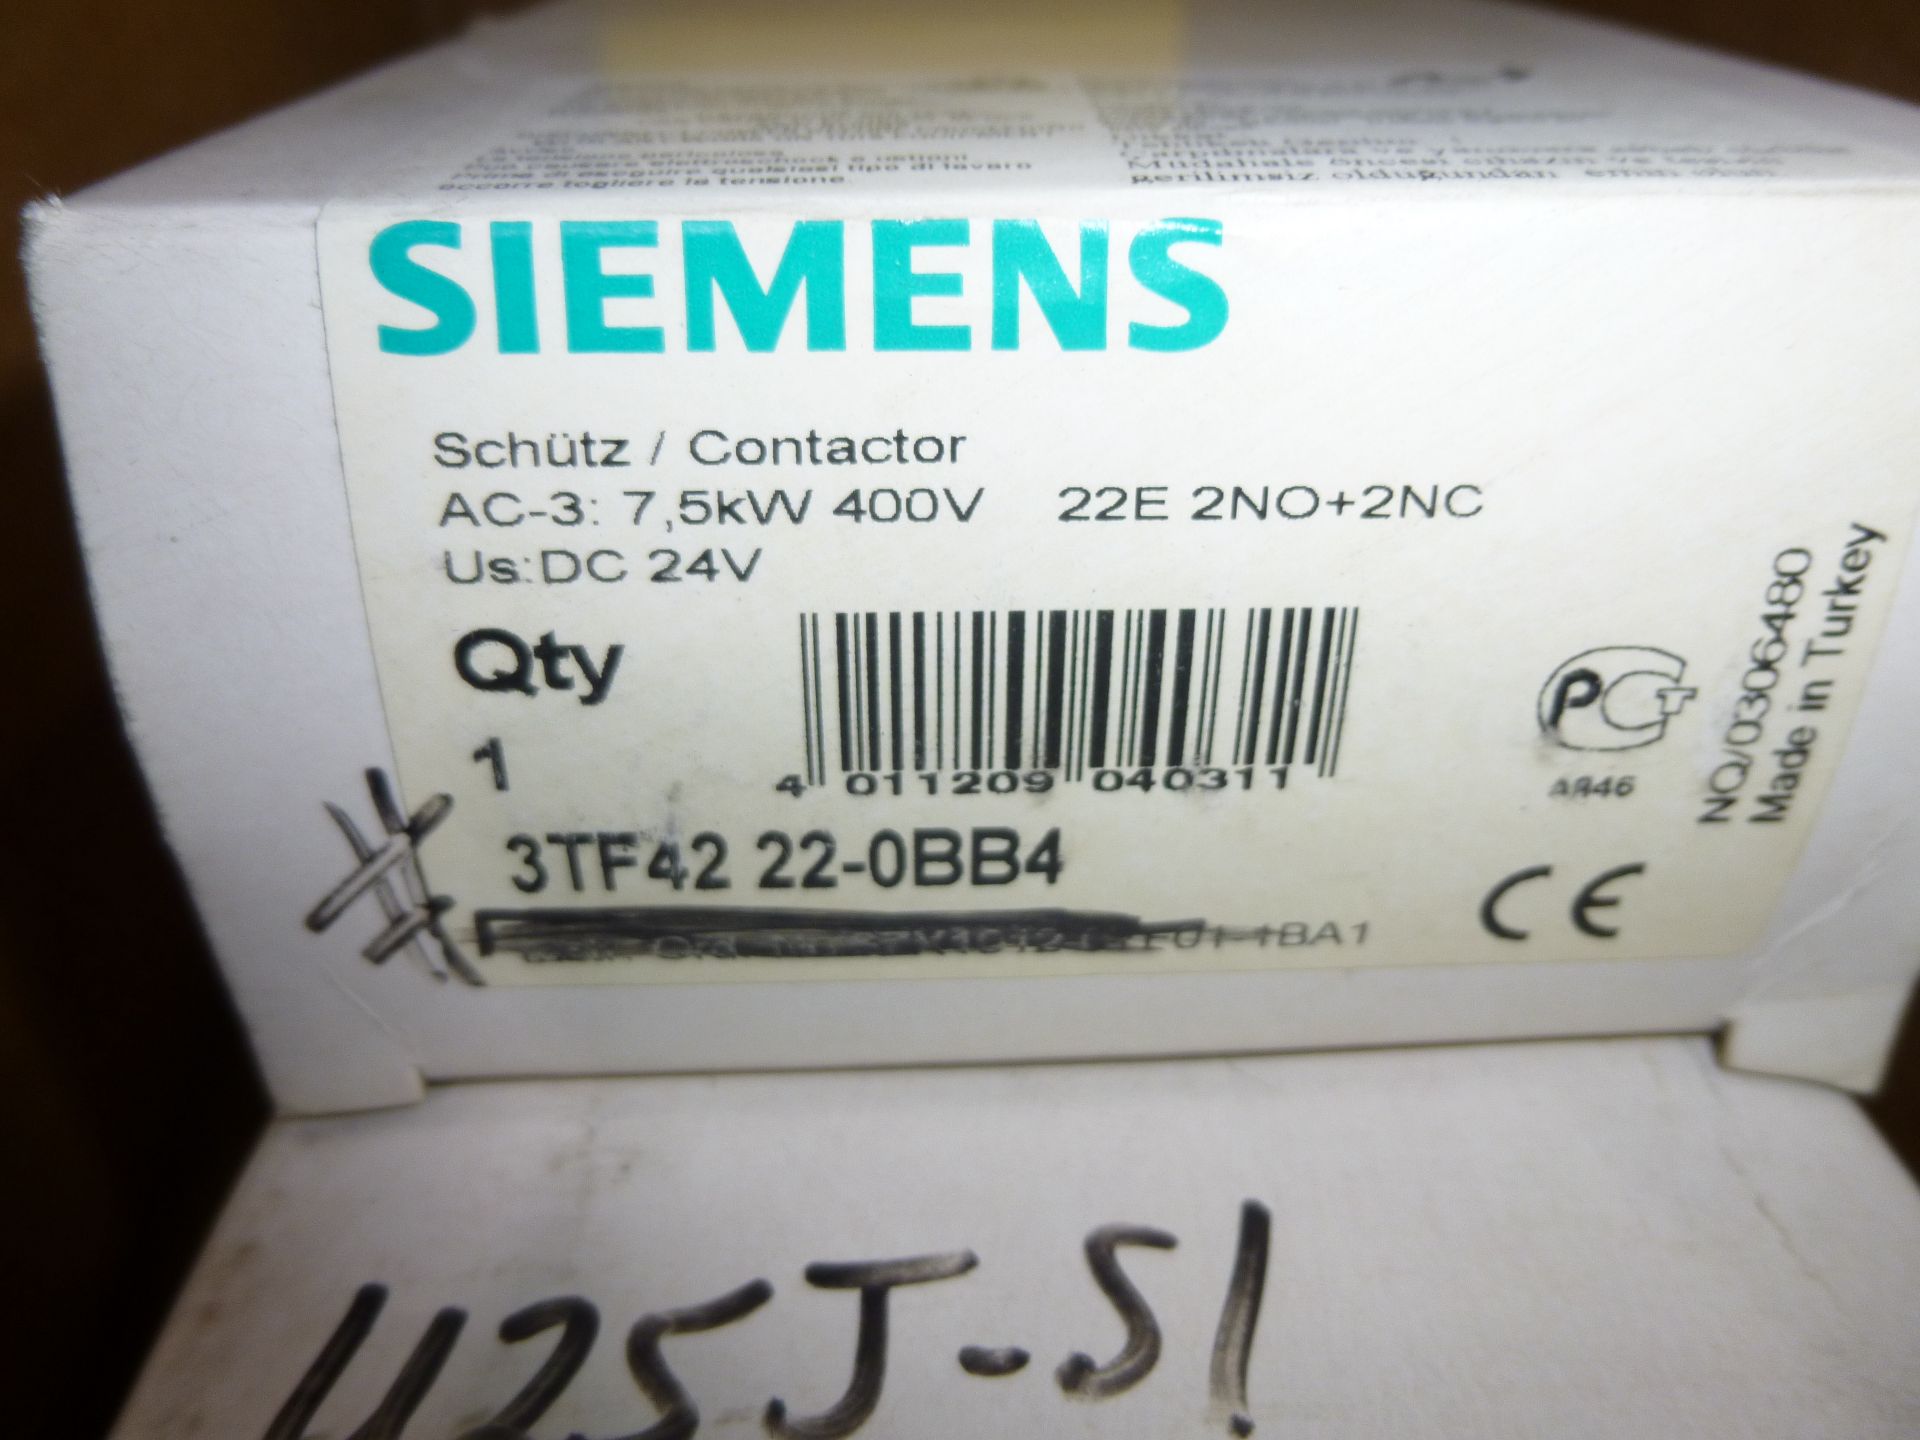 Qty 2 Seimens contactor part number 3TF42-22-0BB4, new in boxes, as always with Brolyn LLC auctions, - Image 2 of 2